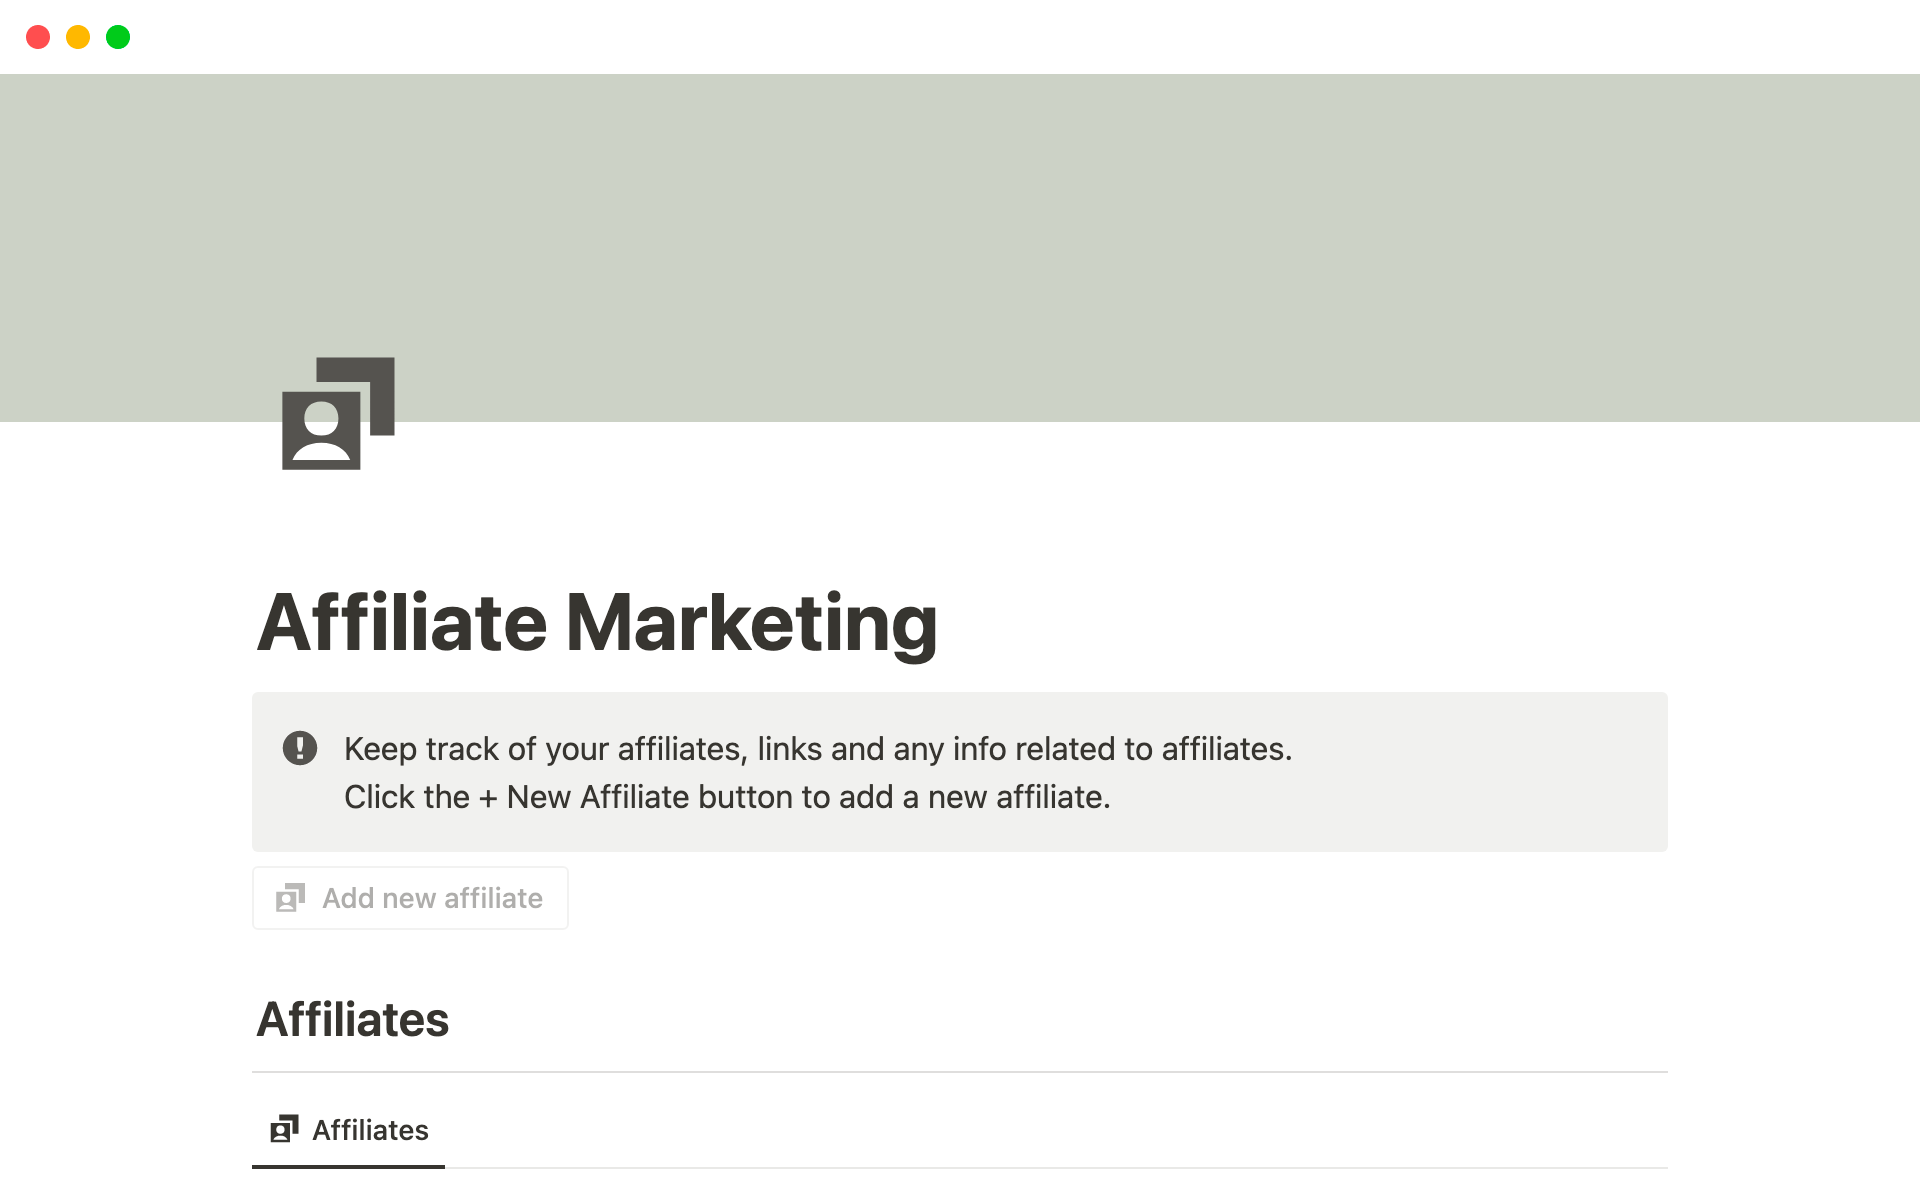 Keep track of your affiliates, links and any info related to affiliates.